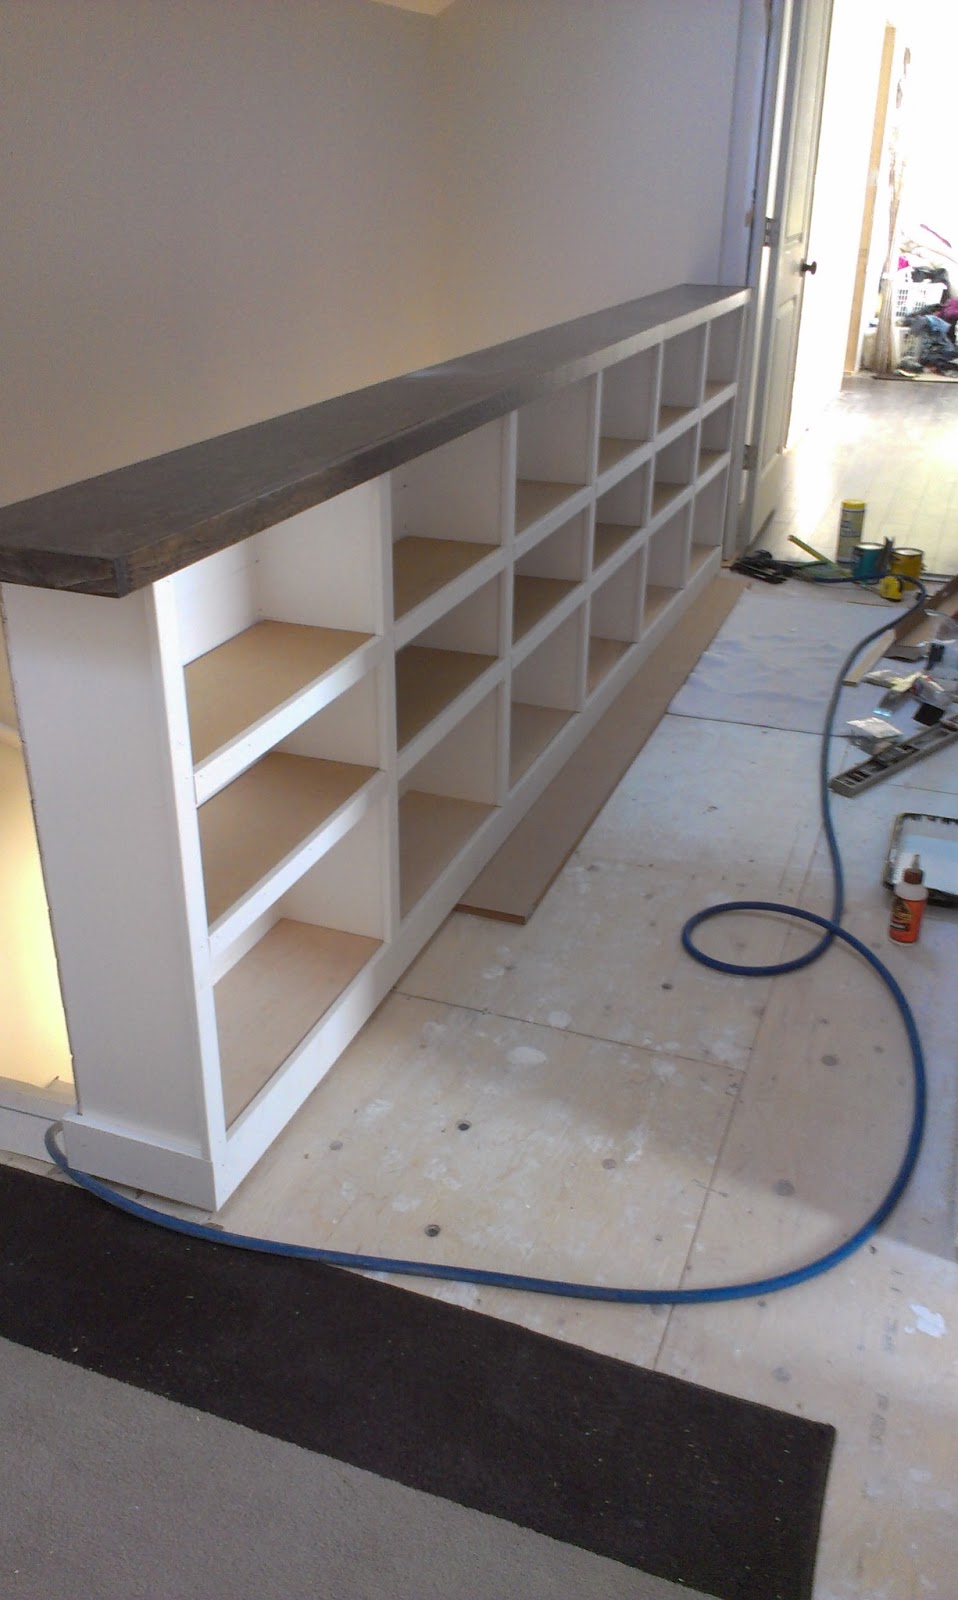 How To Keep From Falling Down A Staircase, How To Build A Bookcase Railing